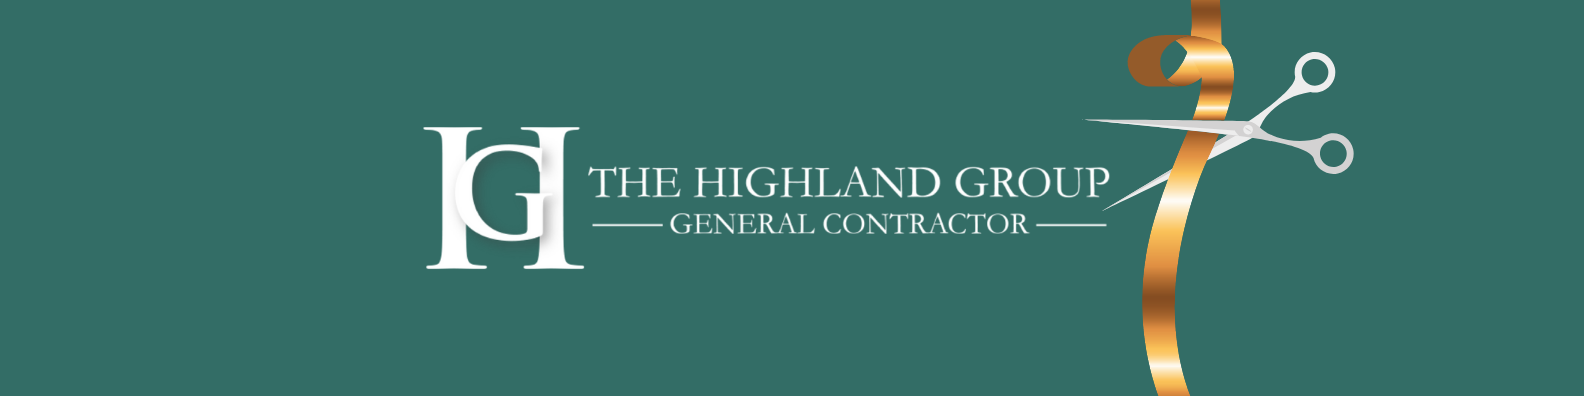 Highland Group Expands Florida Operations with Ribbon Cutting